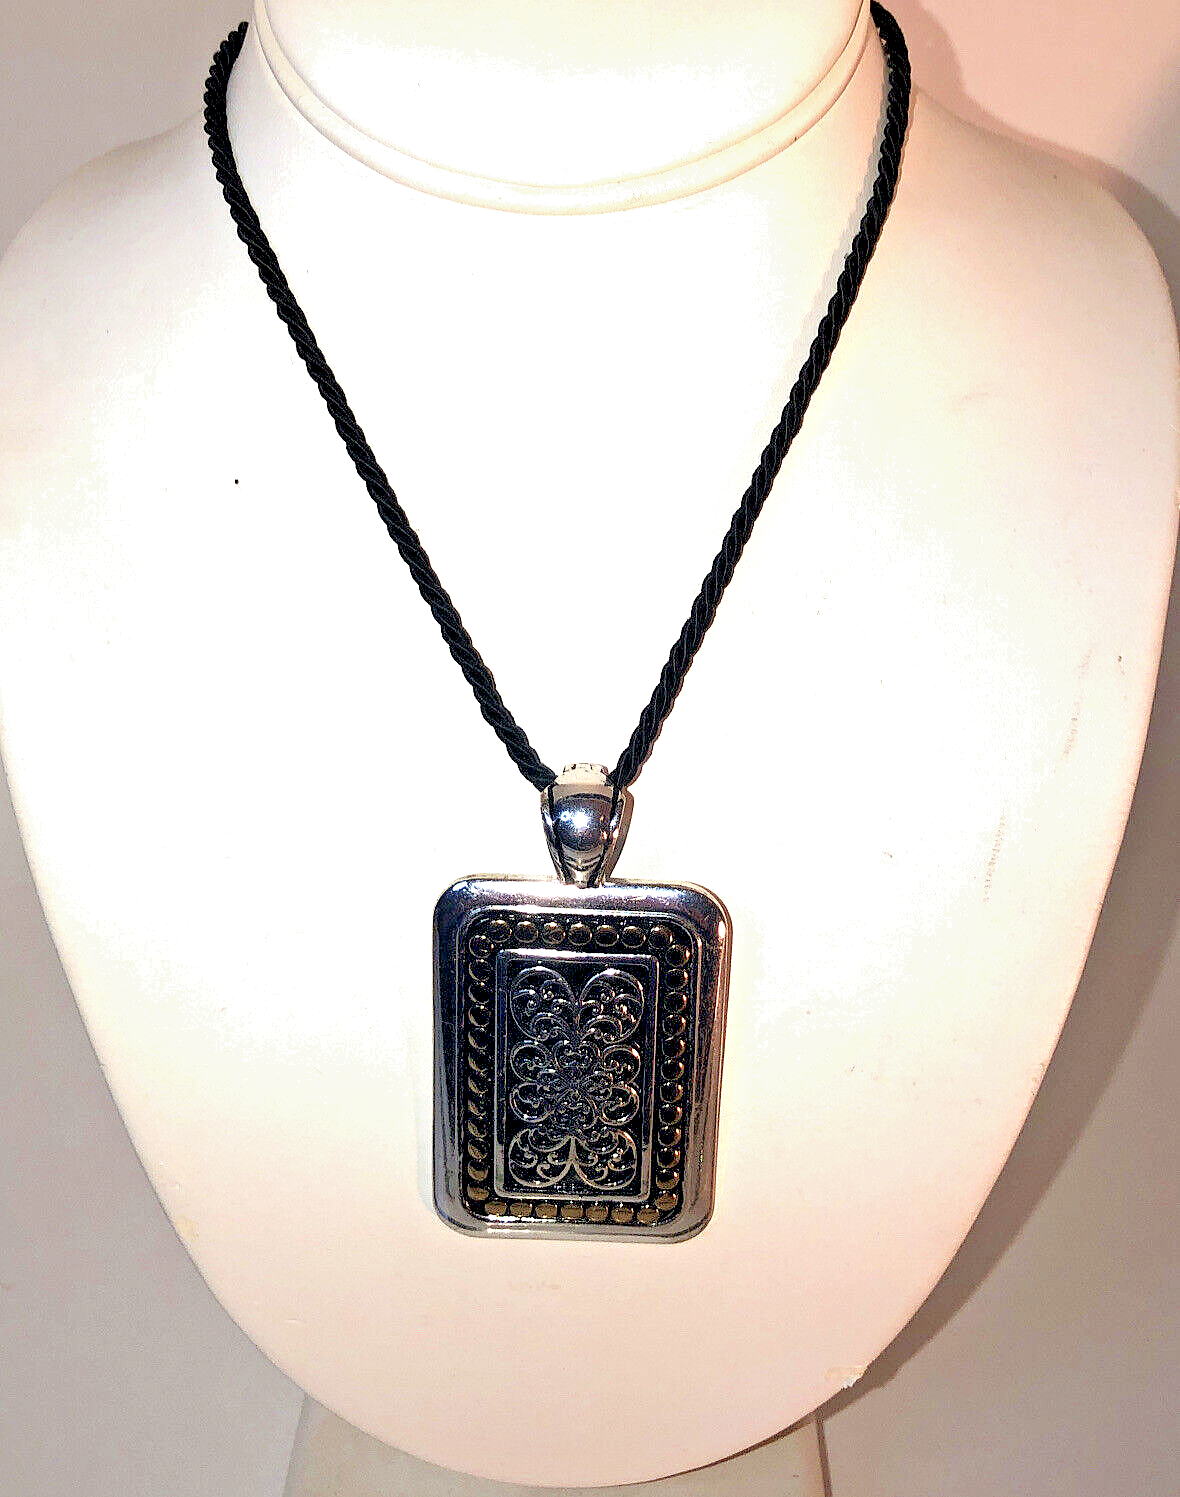 Primary image for Lia Sophia Silver Raised Scrolling  Pendant Necklace On Chain and Leather Cords